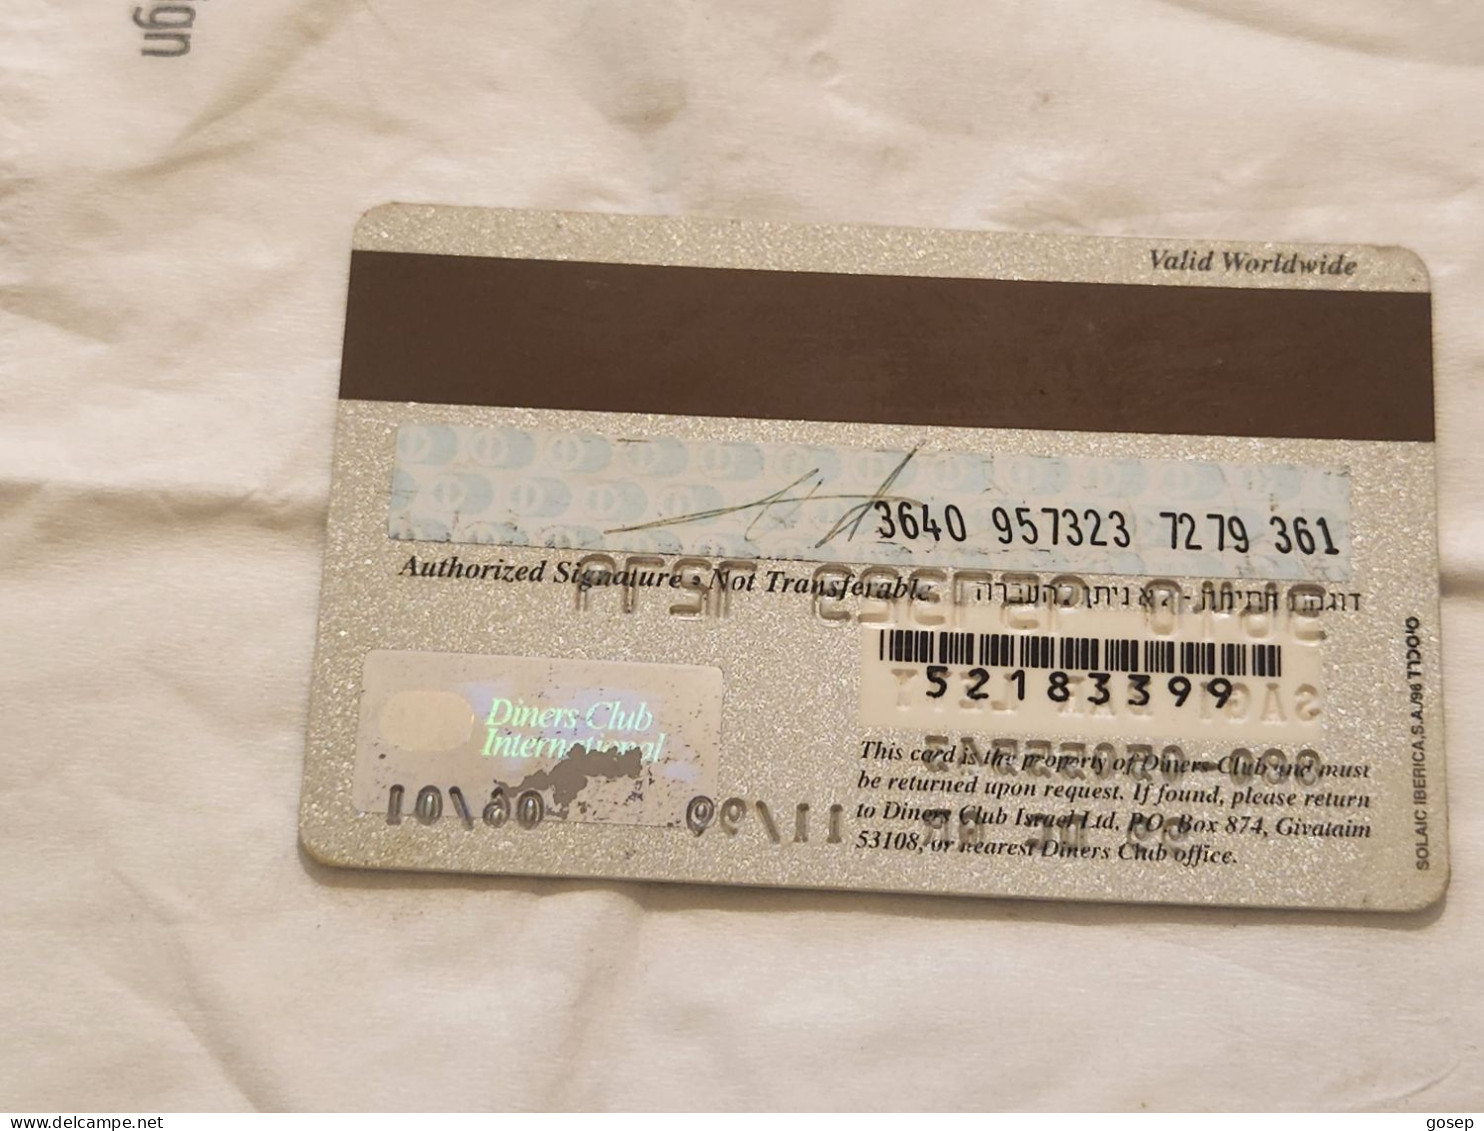 ISRAEL-Diners Club International-gallery Club-(3640-957323-7279)-(11/1999)-used Card - Credit Cards (Exp. Date Min. 10 Years)